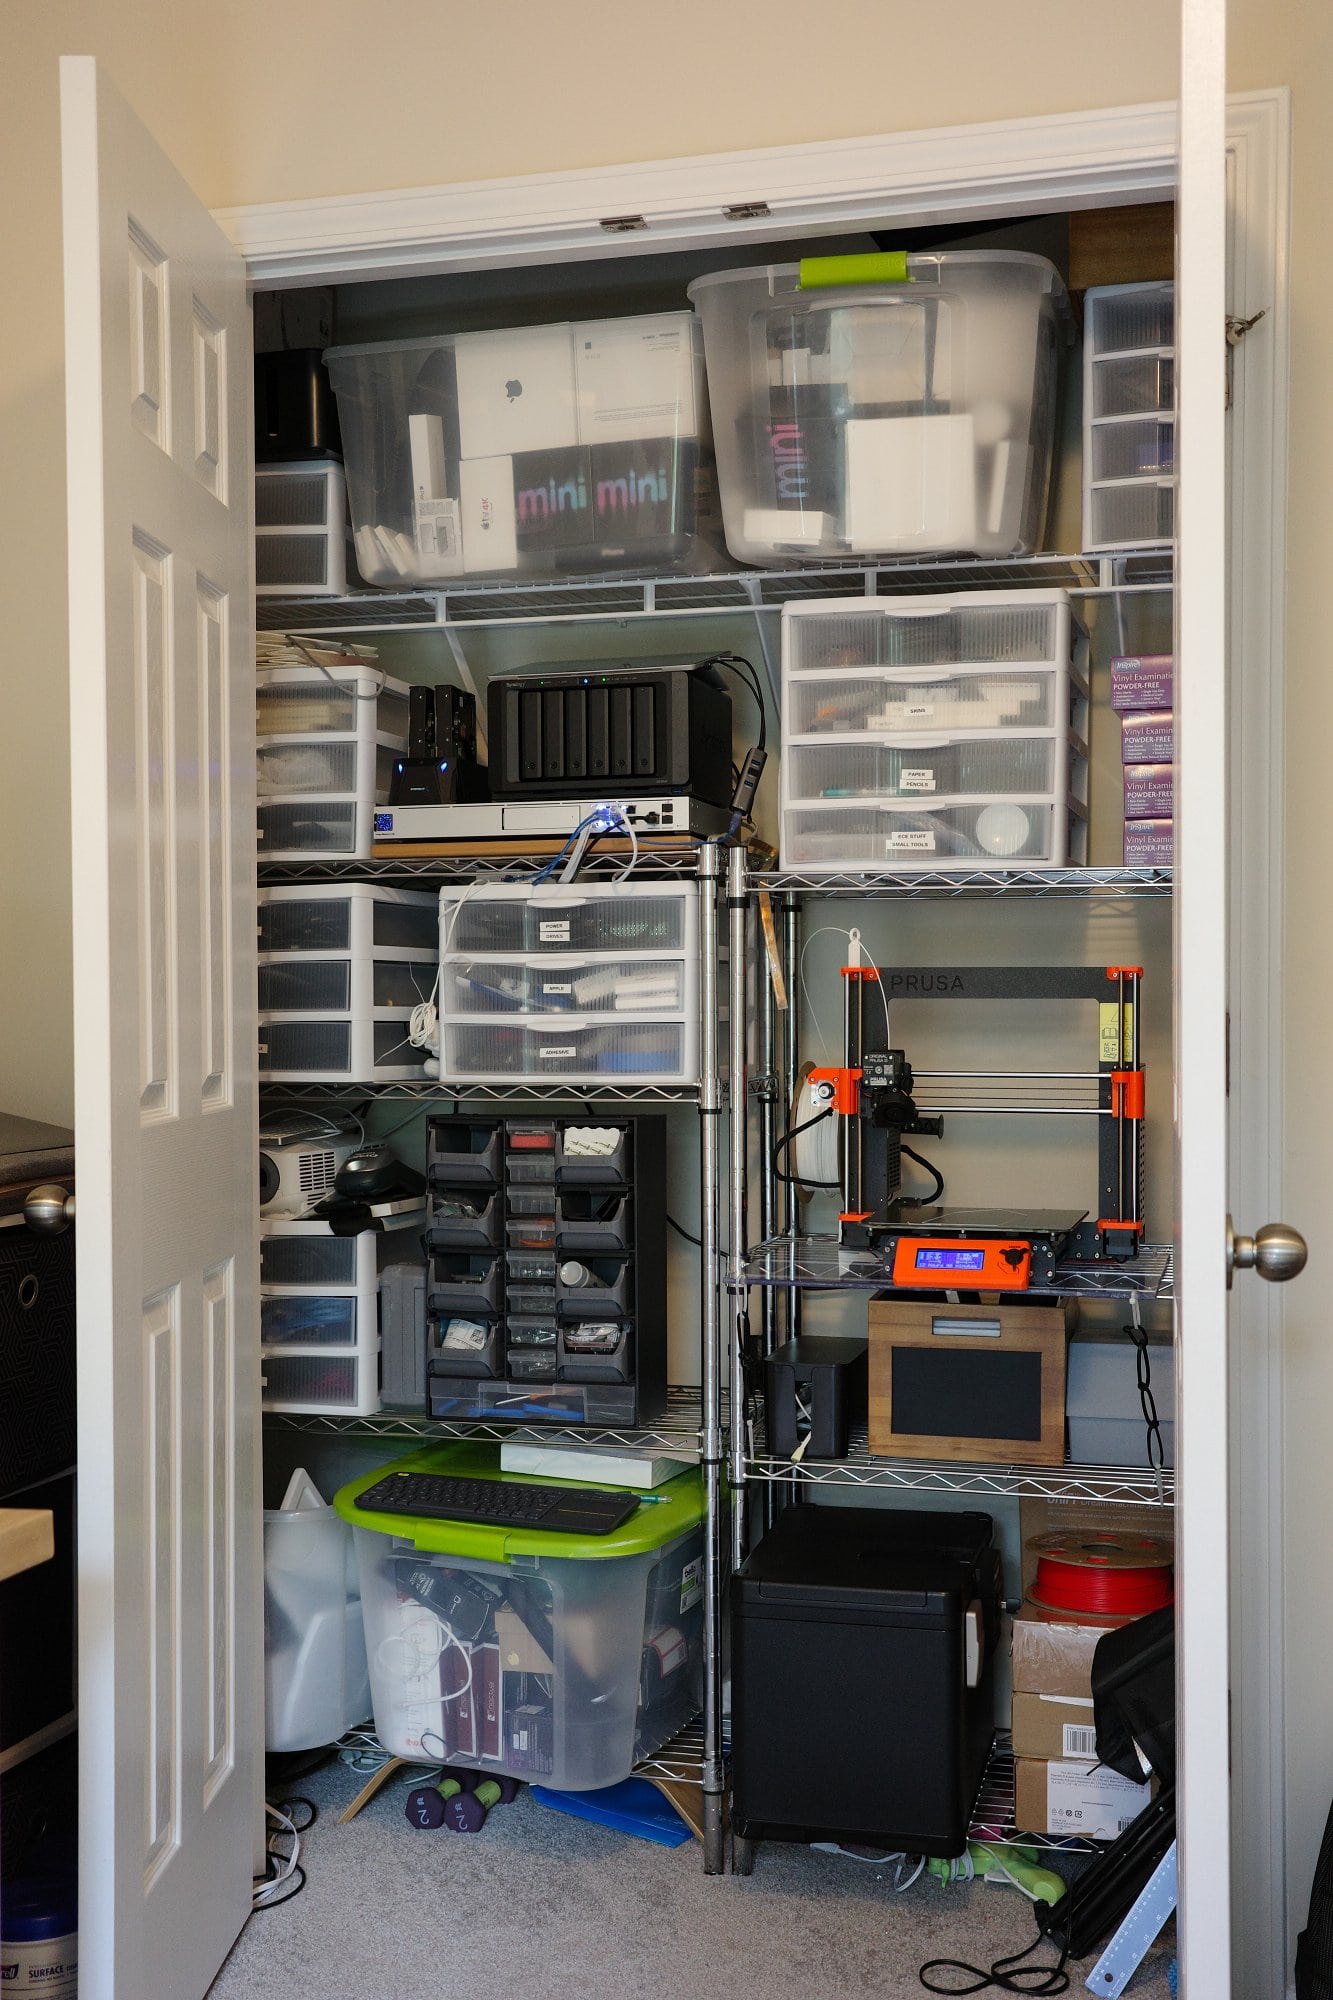 A well-organised storage closet, primarily containing technological equipment and accessories